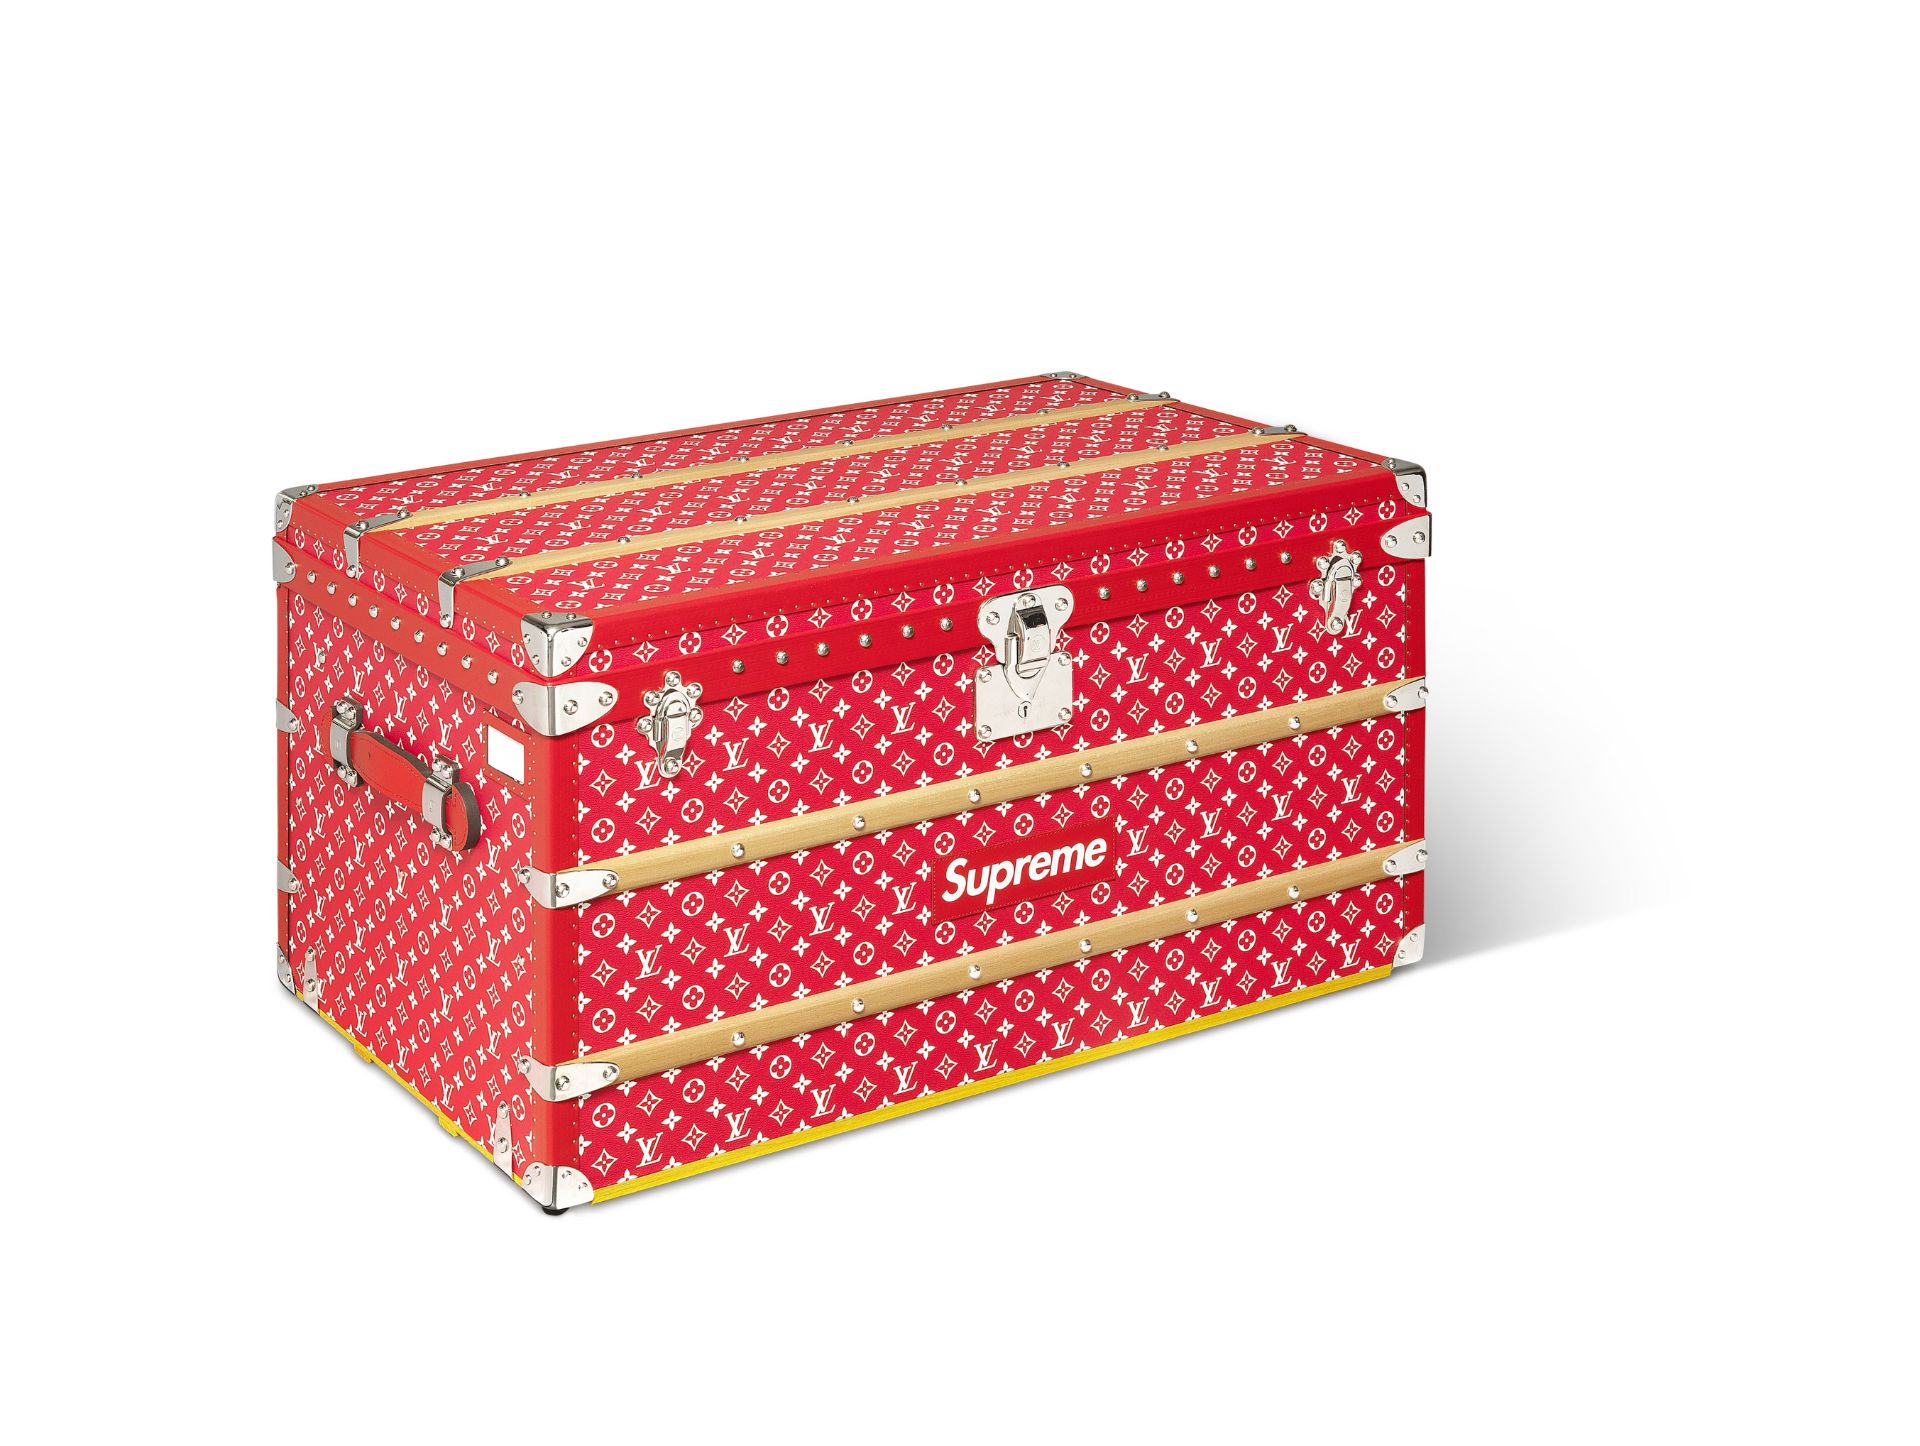 Louis Vuitton x Supreme A Limited Edition Red And White Monogram Malle Courrier 90 Trunk, 2019 (i...